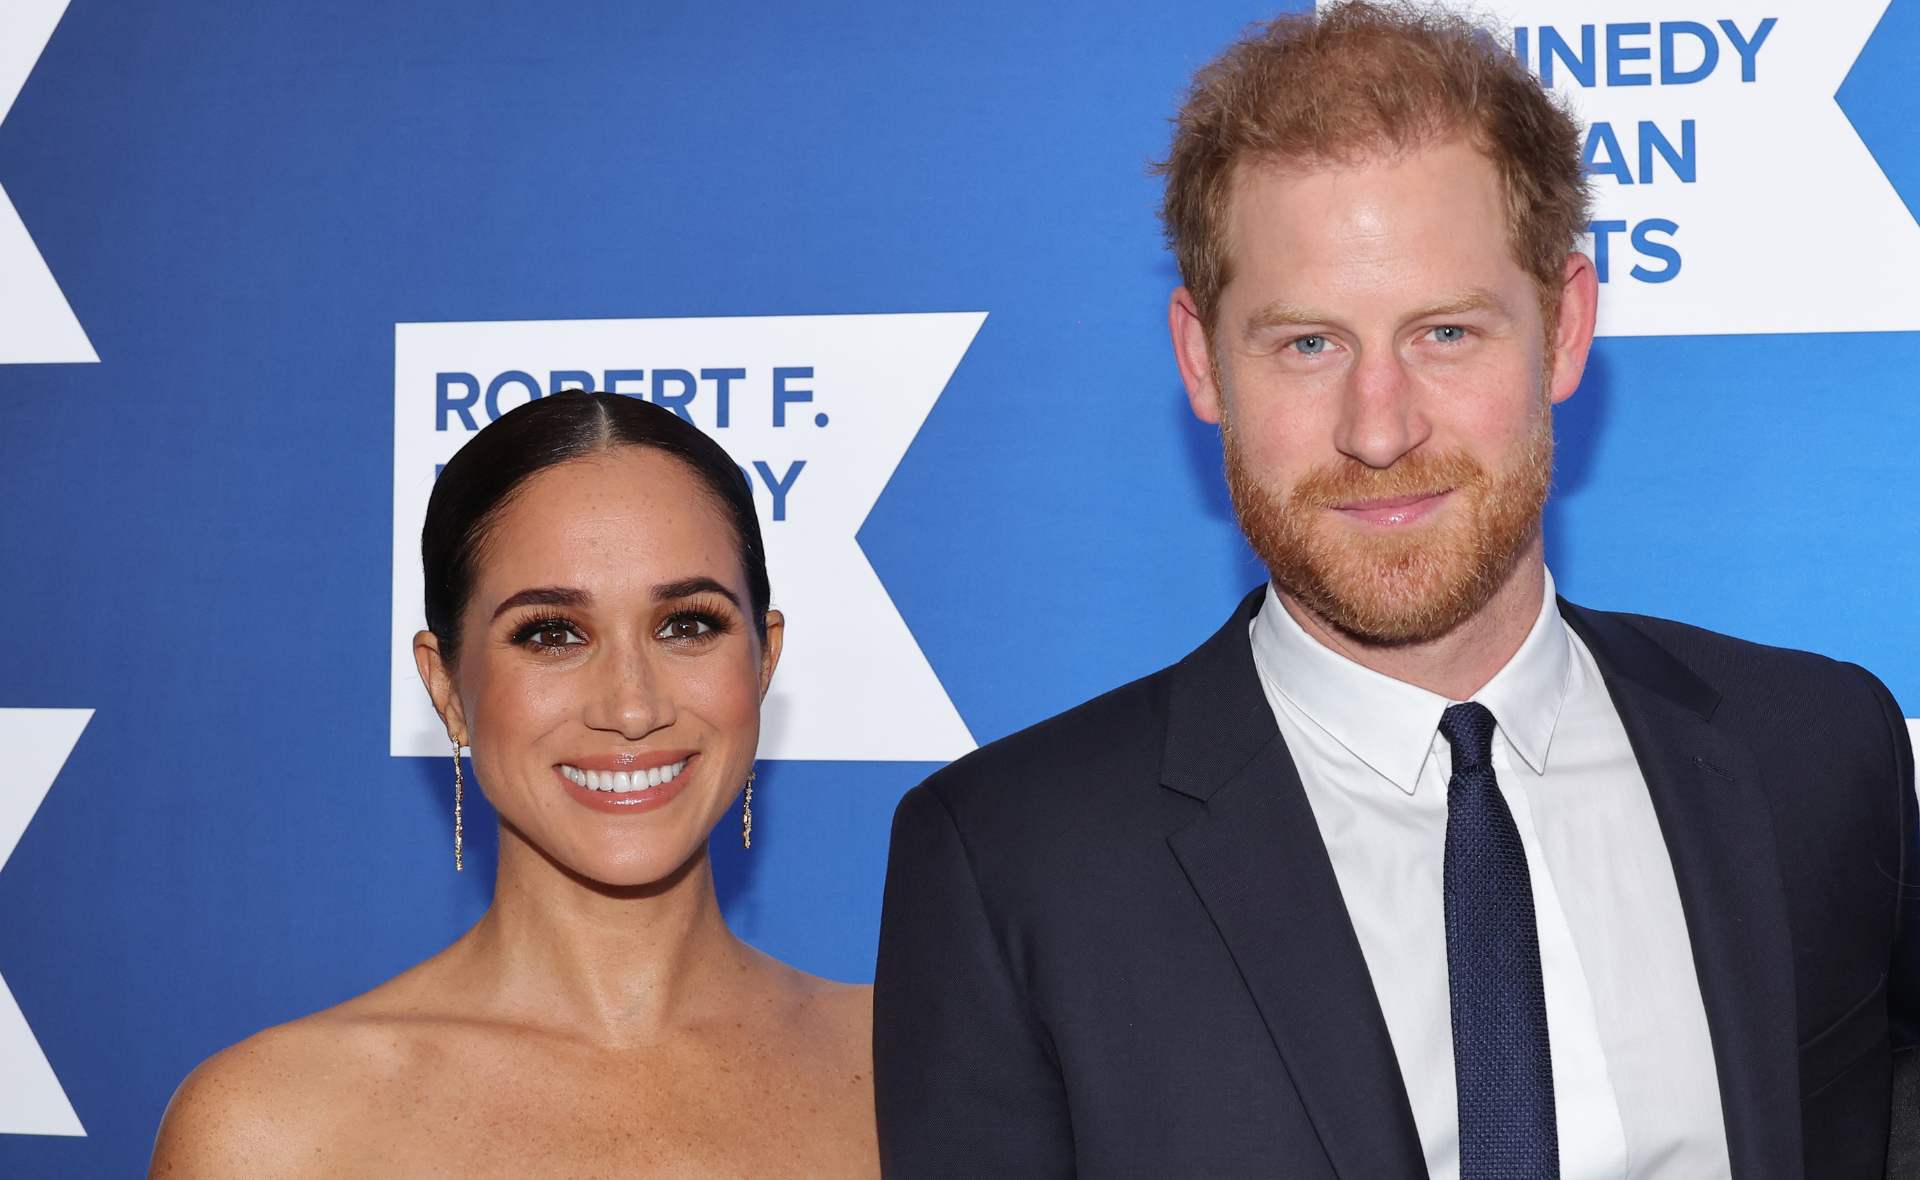 Meghan Markle and Prince Harry strut the blue carpet with Princess Di’s heirloom